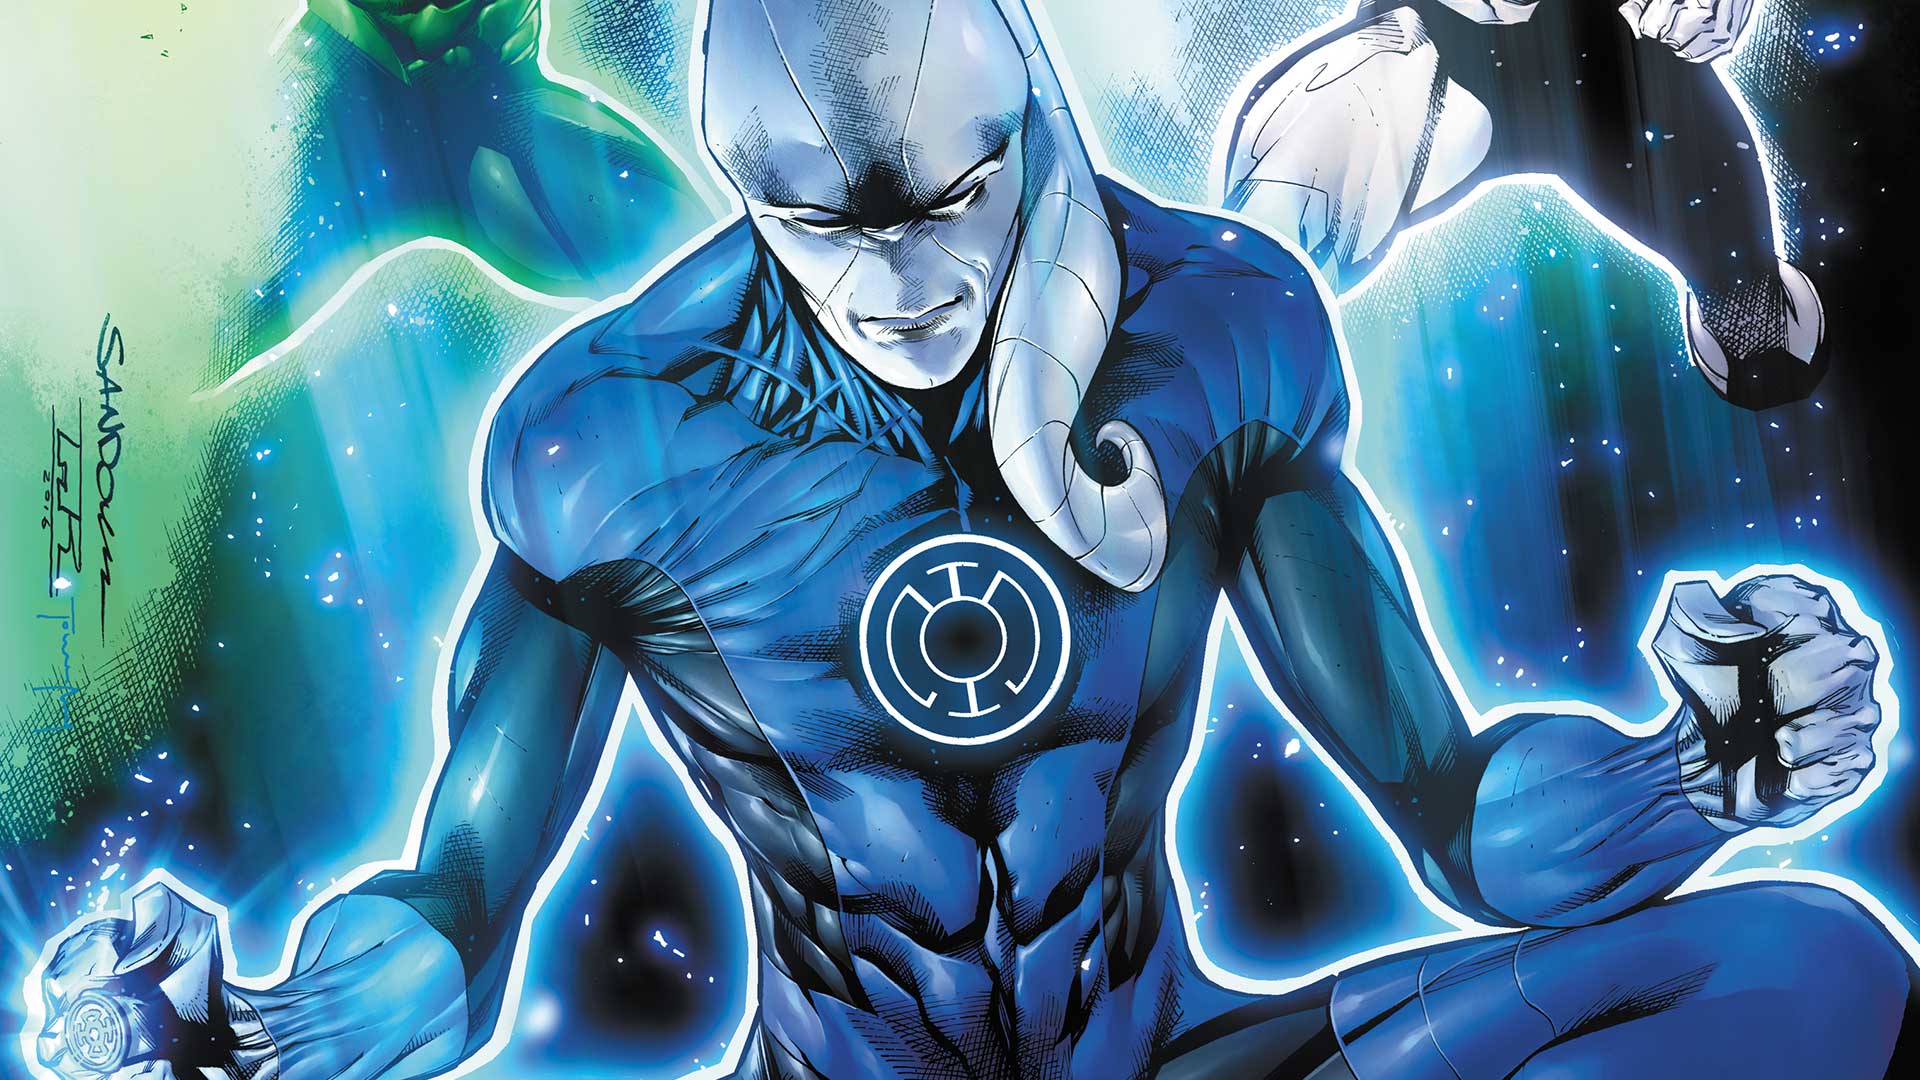 All Will Be Well: Meet the Blue Lantern Corps | DC